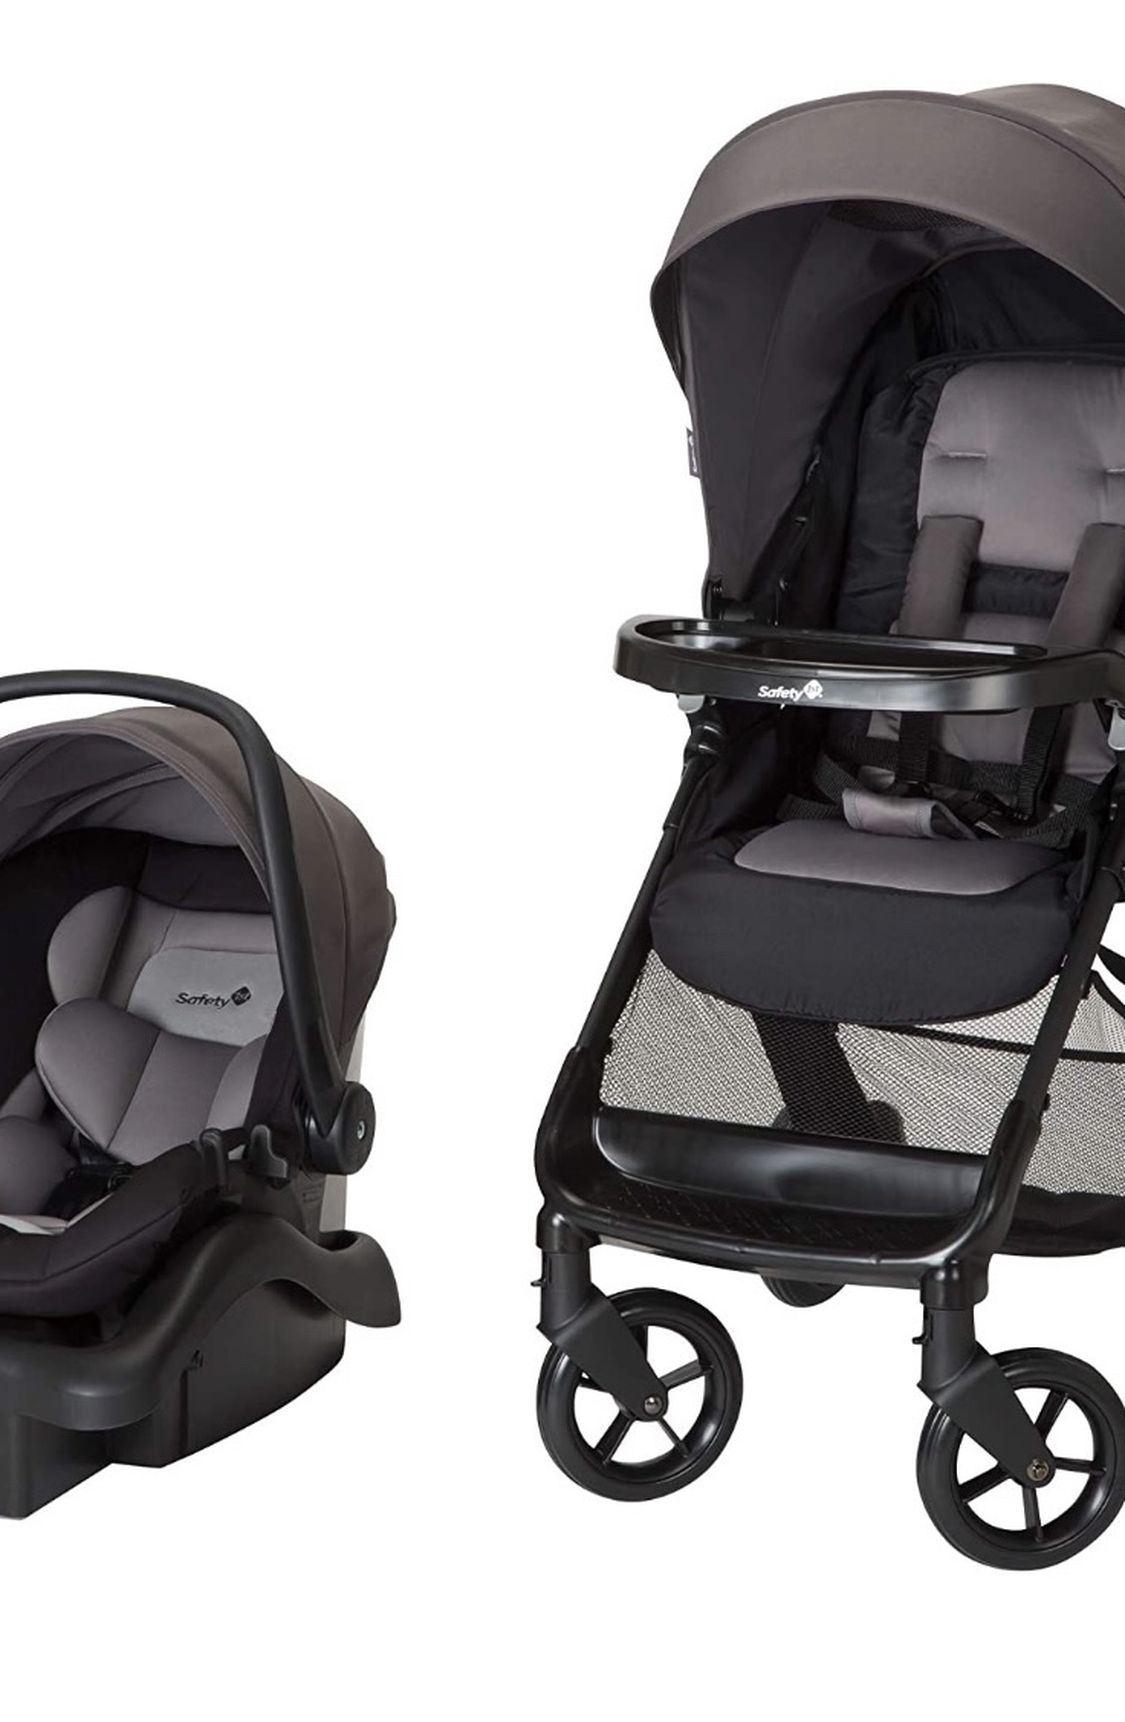 Safety First Car Seat And Stroller Set